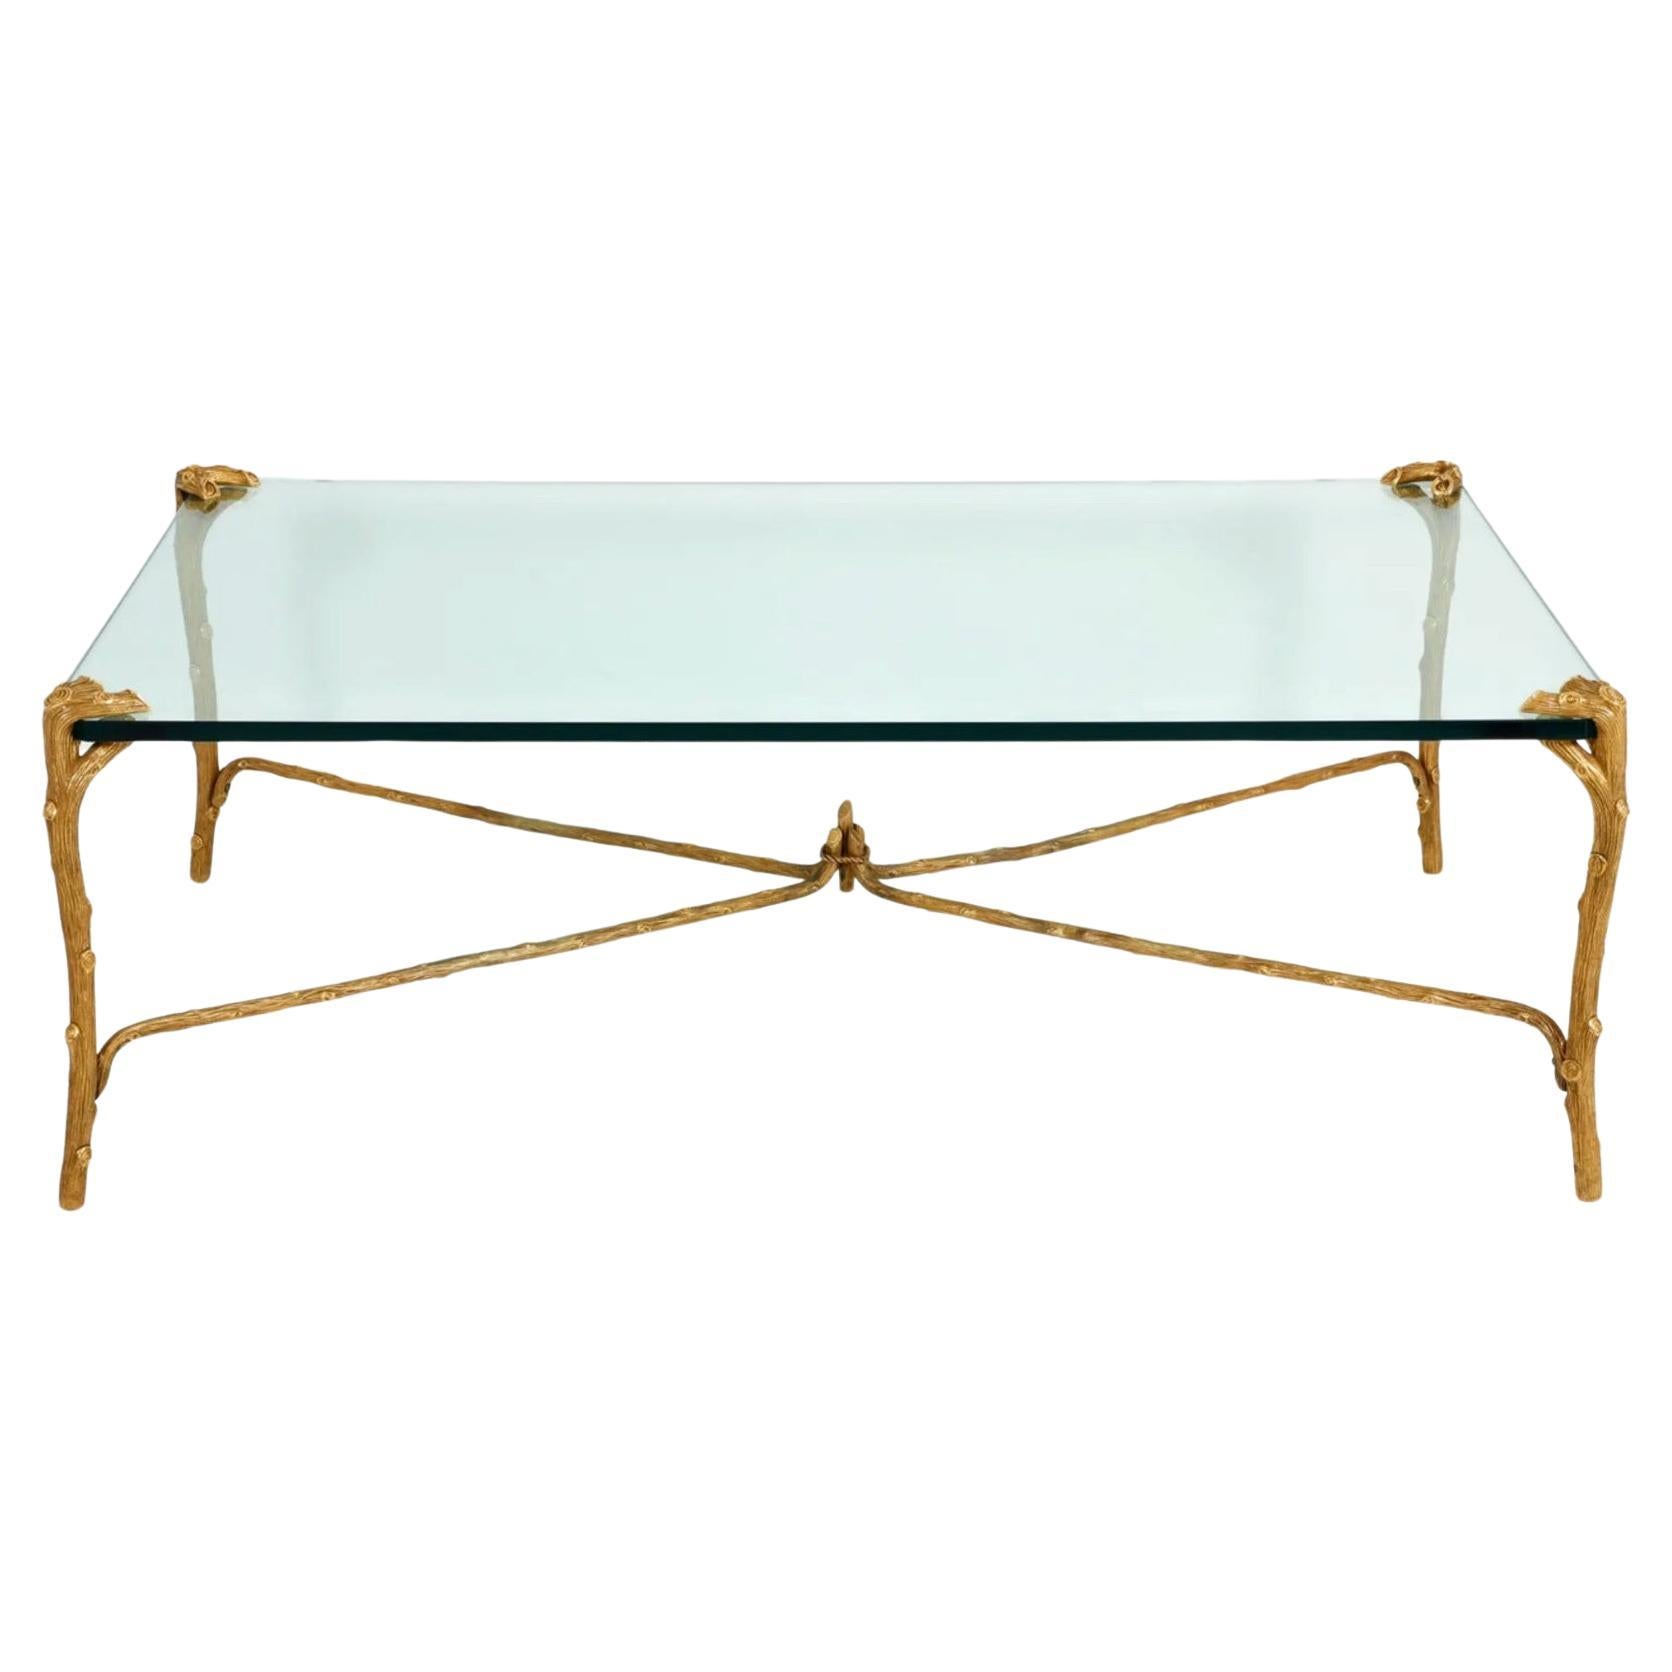 This is a stunning bronze large P.R.Guerin coffee table that dates to c. 1965-1980. This particular P.E. Guerin coffee table is in the highly desirable faux bois form. The table is finely cast of bronze which is subsequently hand chiseled and gold